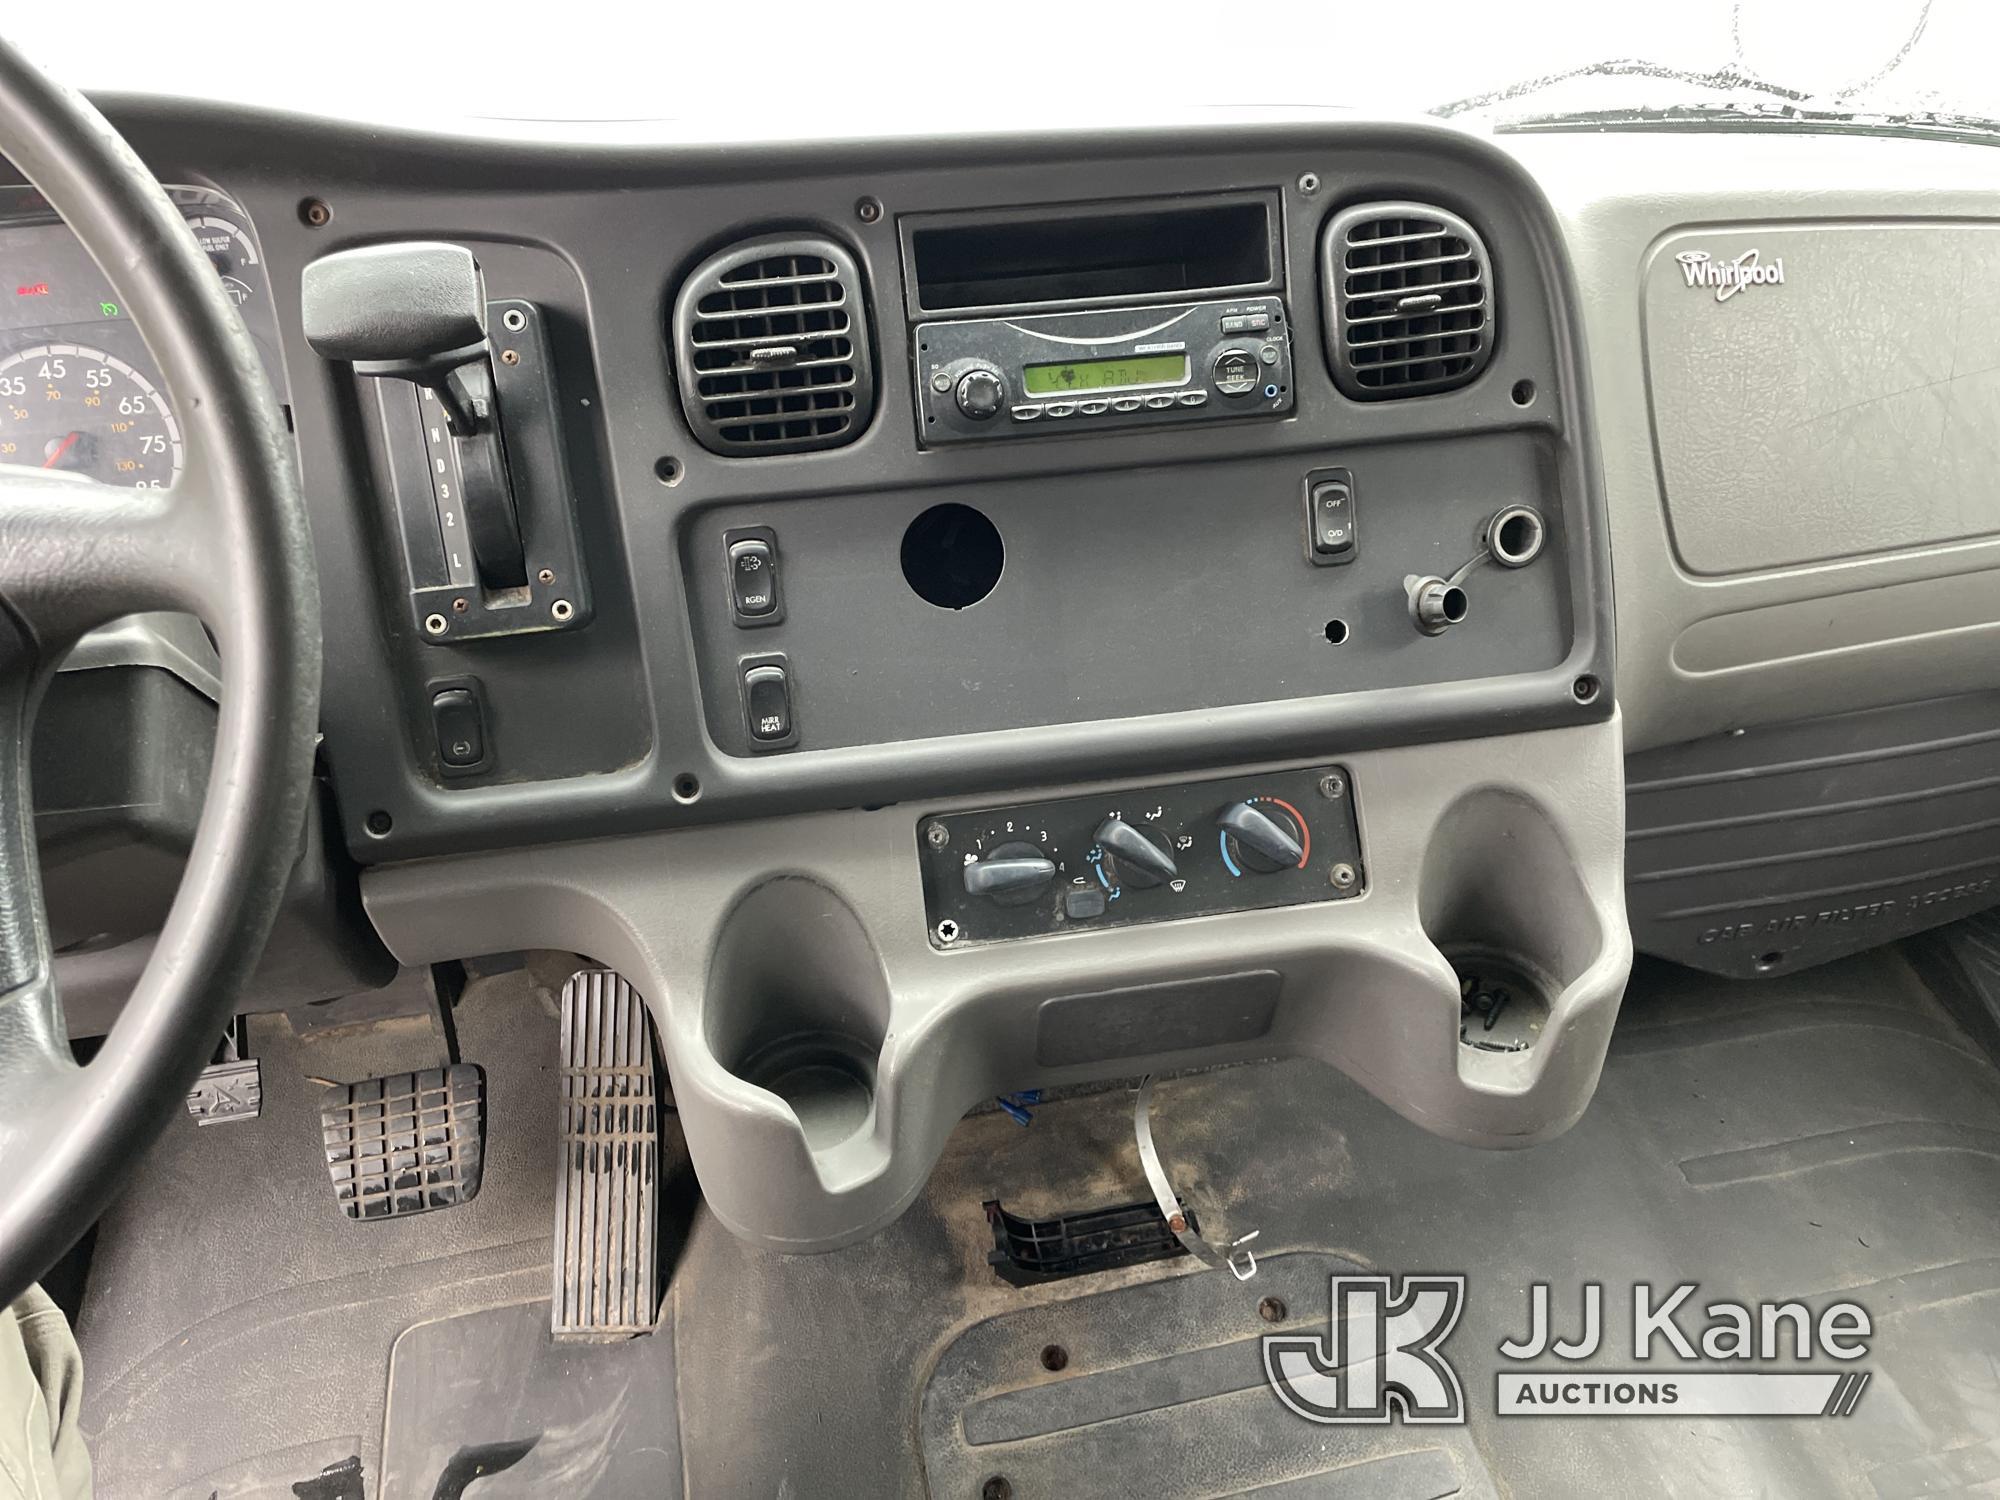 (Mount Airy, NC) 2013 Freightliner M2 106 Van Body Truck Runs & Moves) (Check Engine Light on